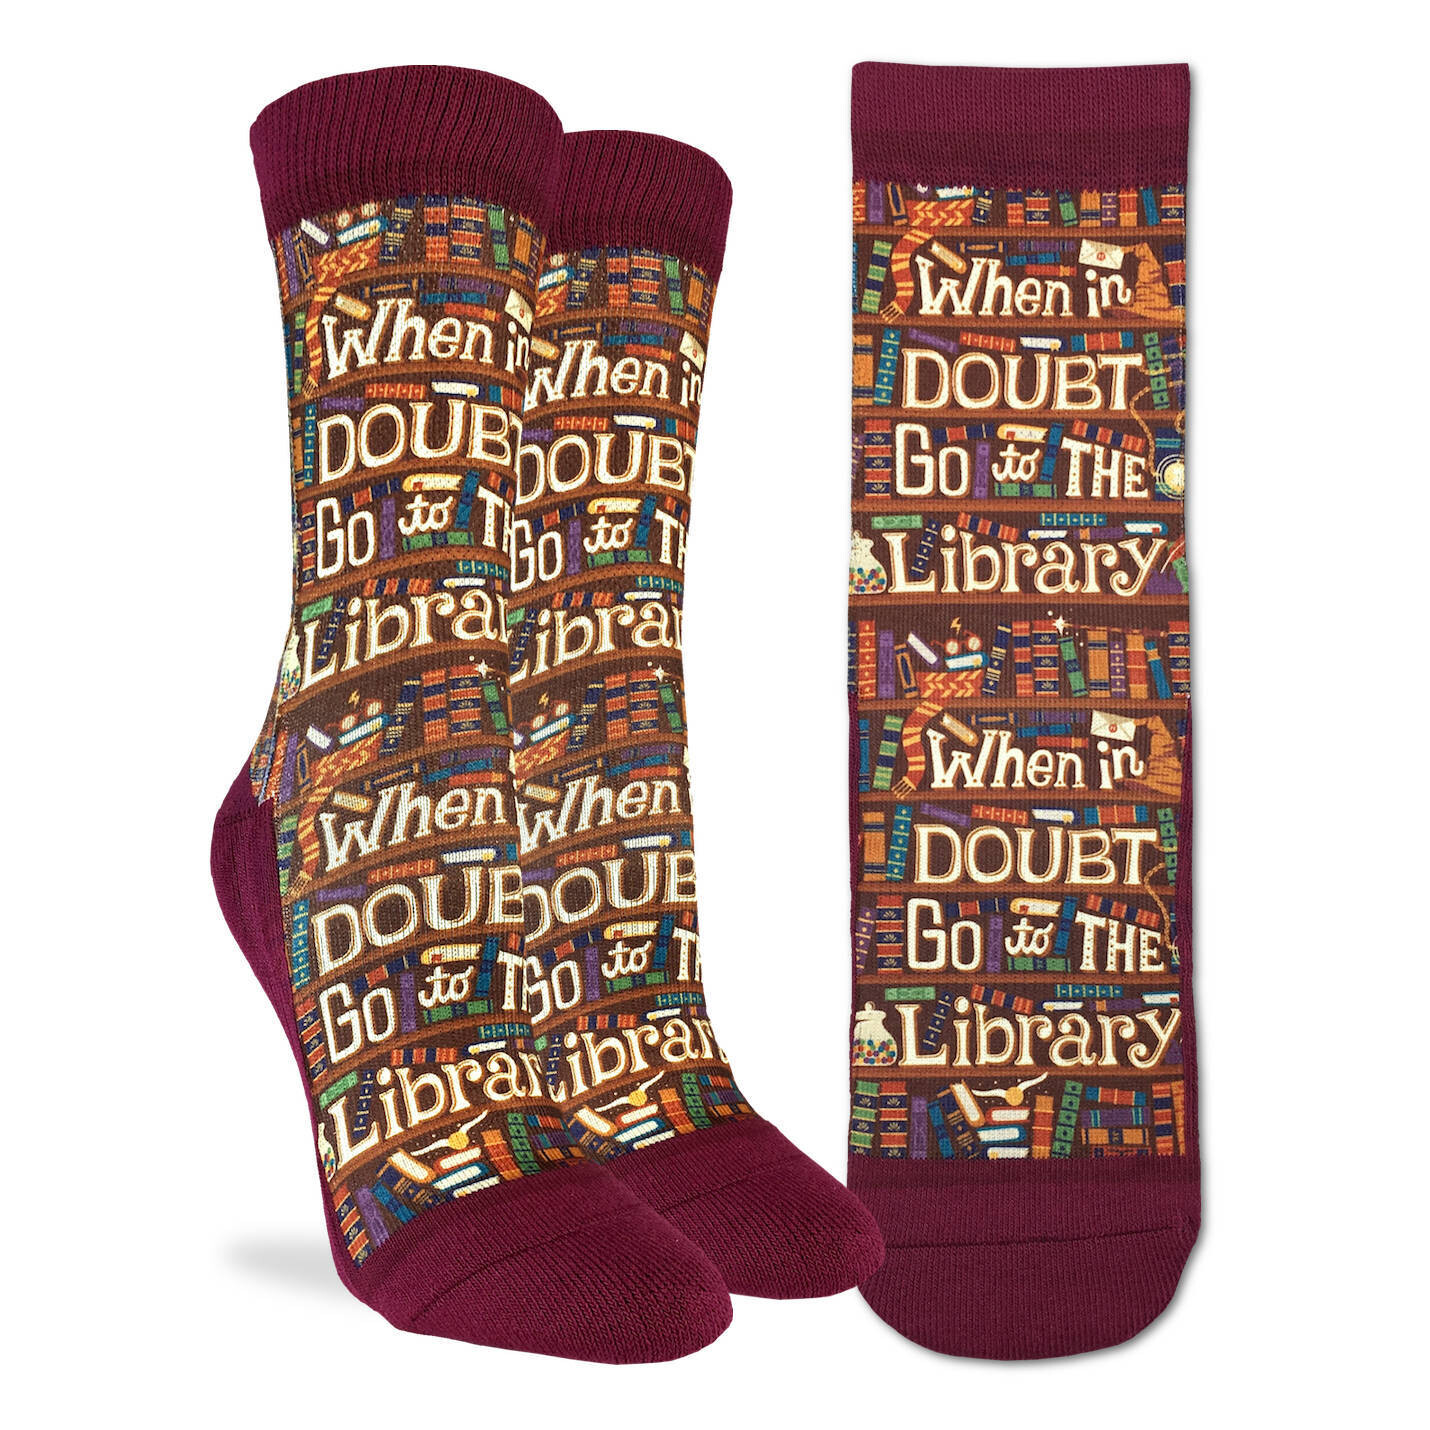 When In Doubt Go to the Library Socks